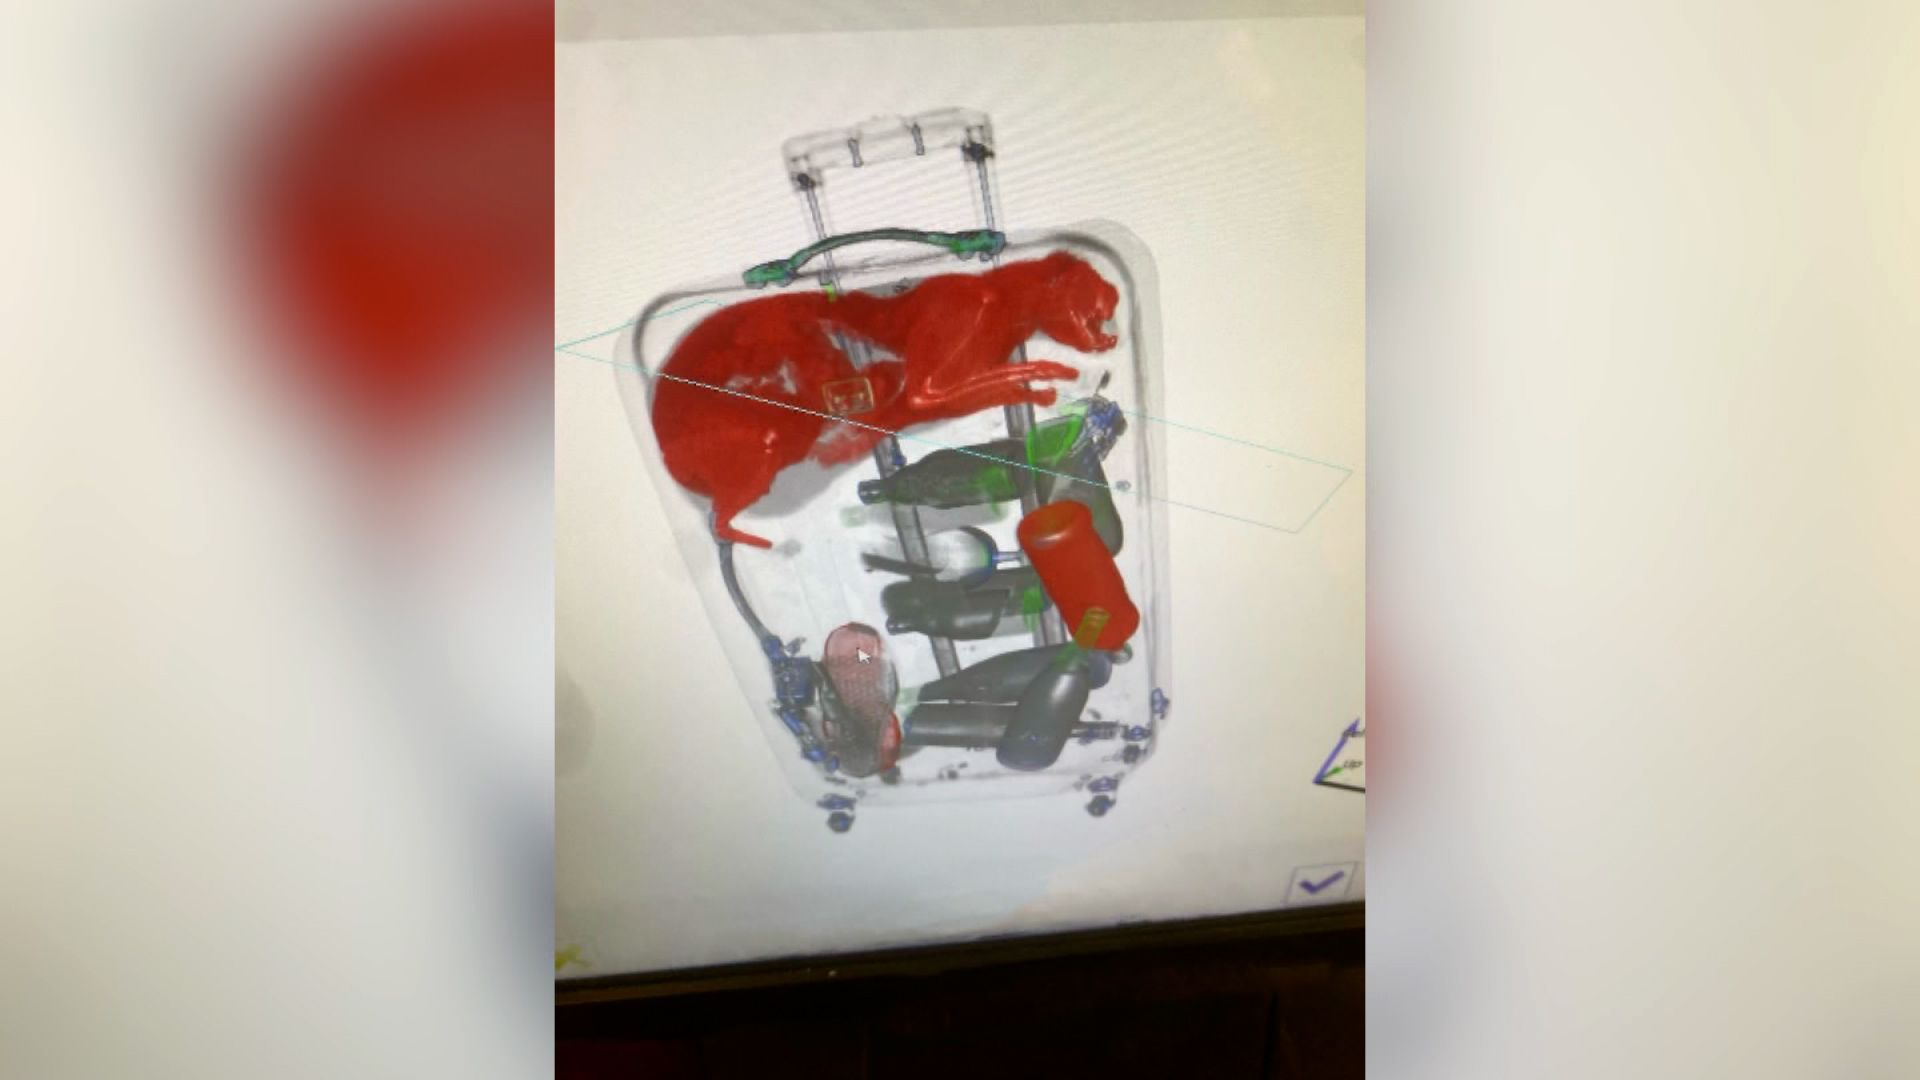 TSA Finds Cat Inside Carry On Bag After X Ray Scan at Airport